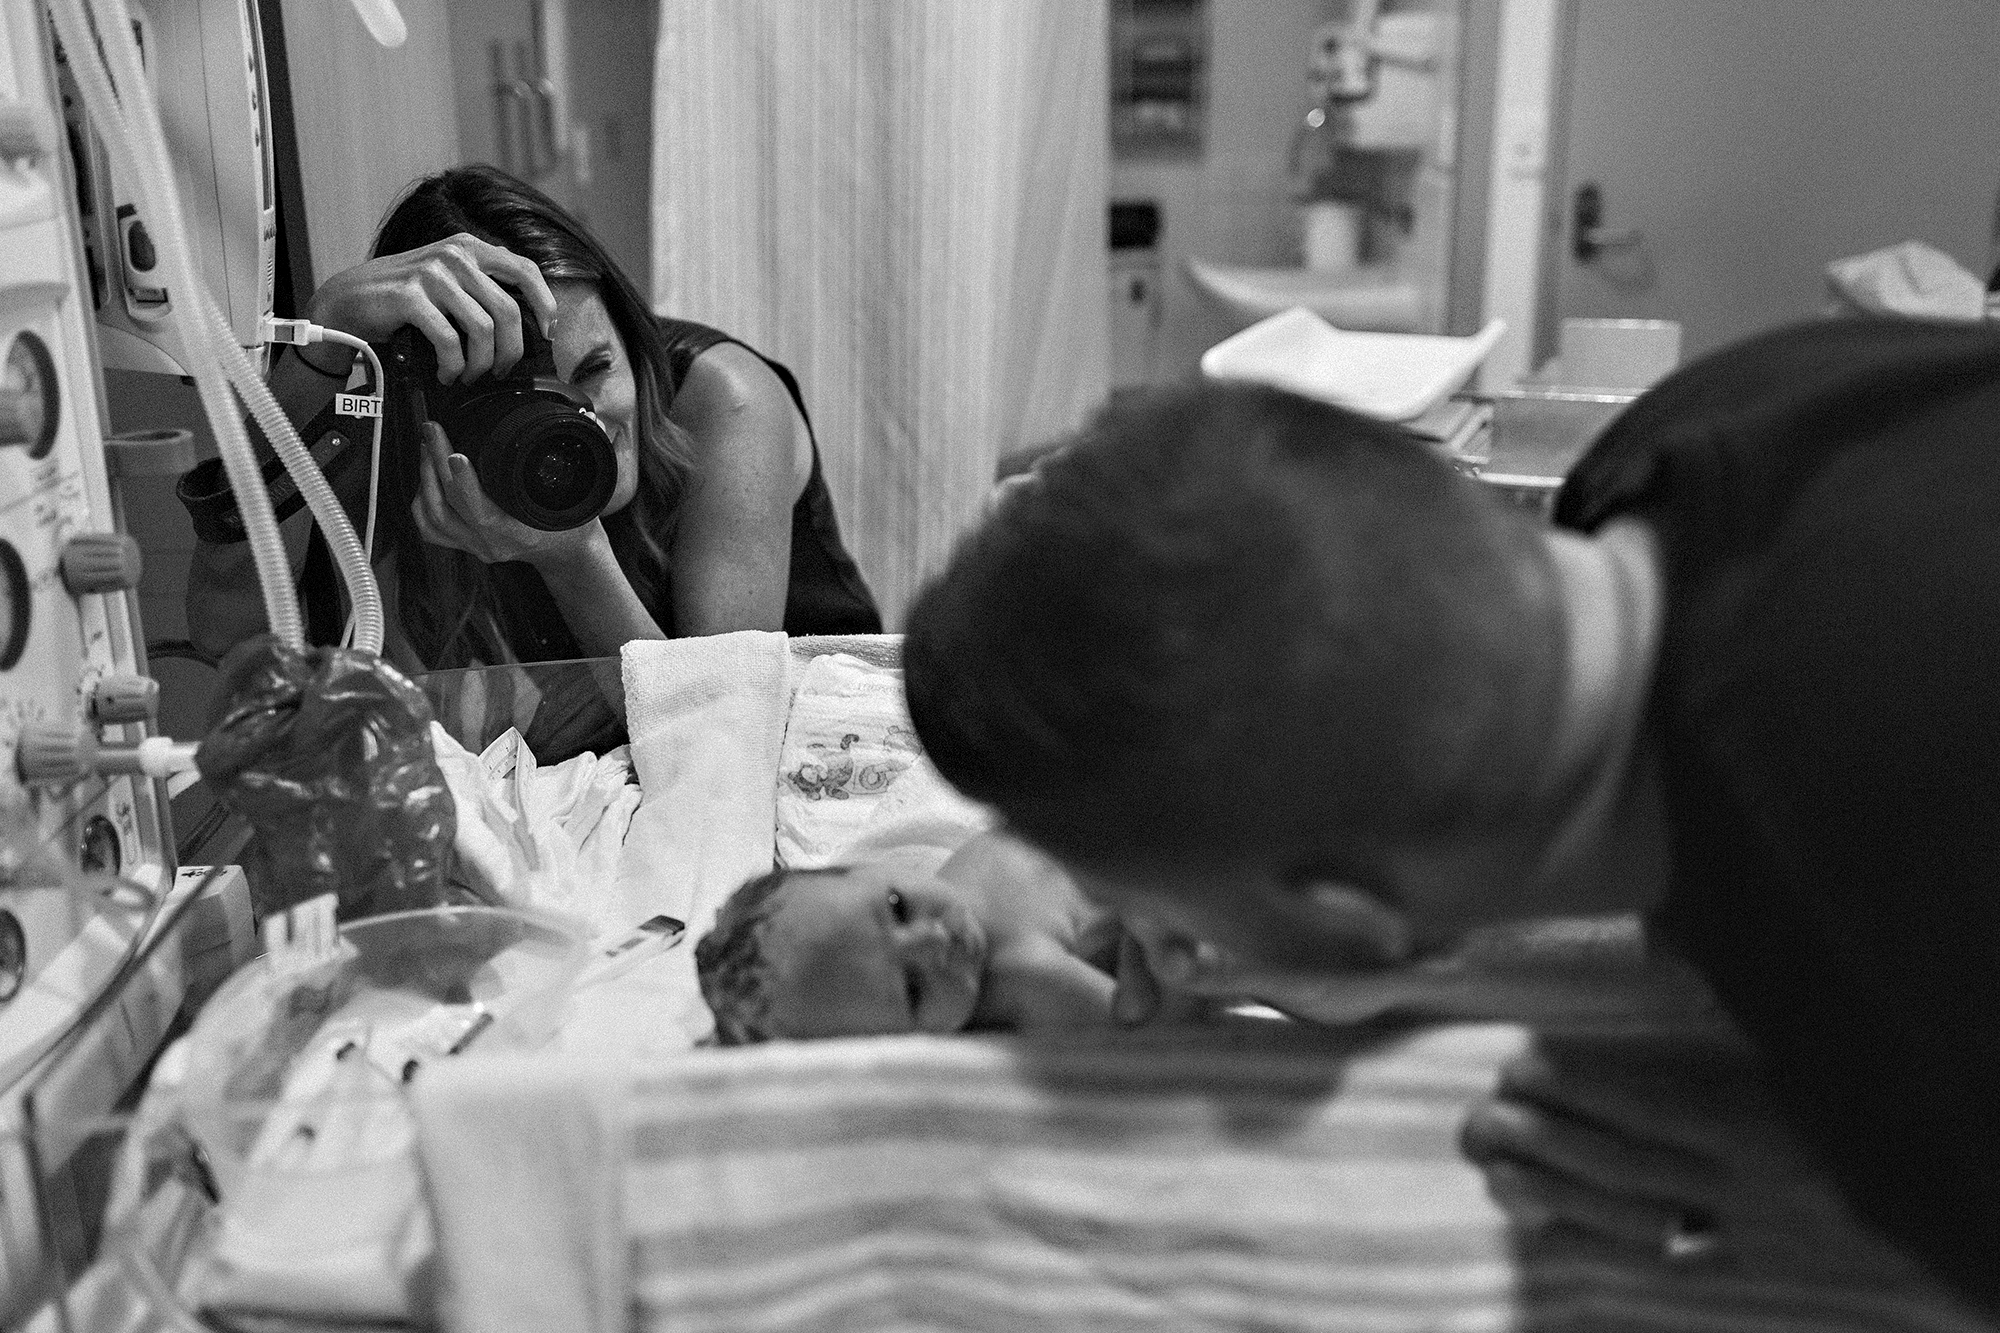 PHOTO: The First Hello Project captures the intimate and emotional first moments between newborn babies and their parents.